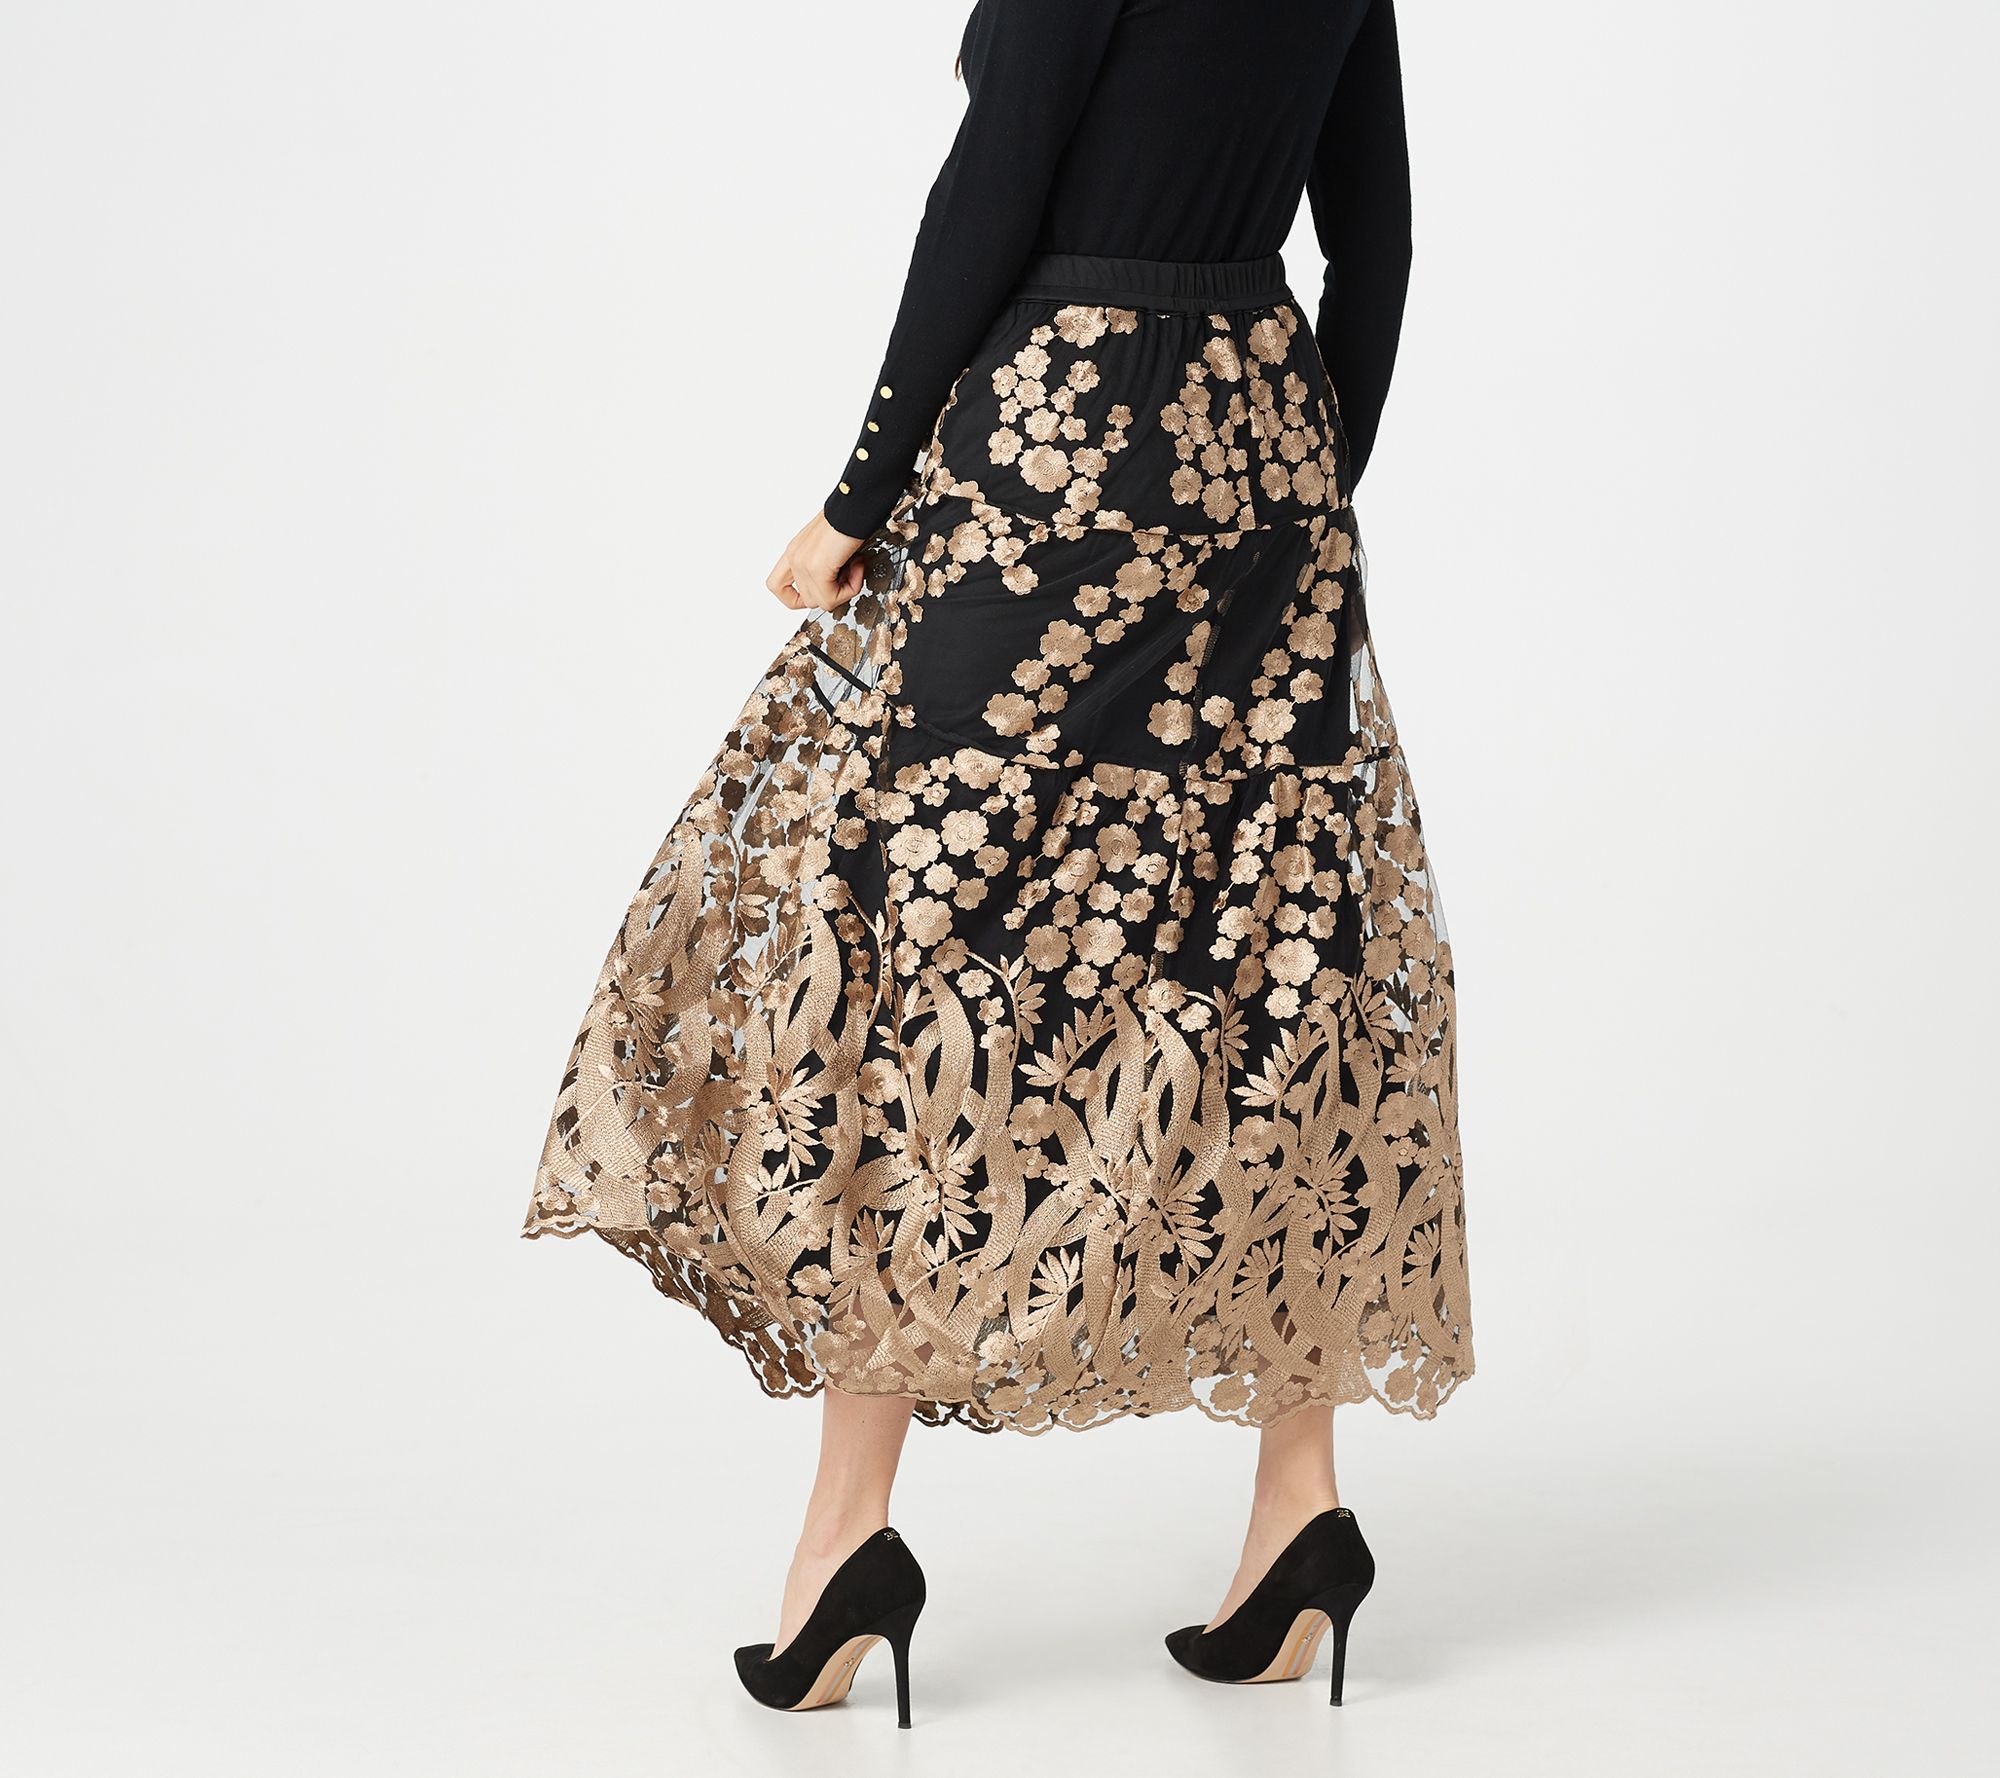 Linea by Louis Dell'Olio Regular Embroidered Skirt - QVC.com